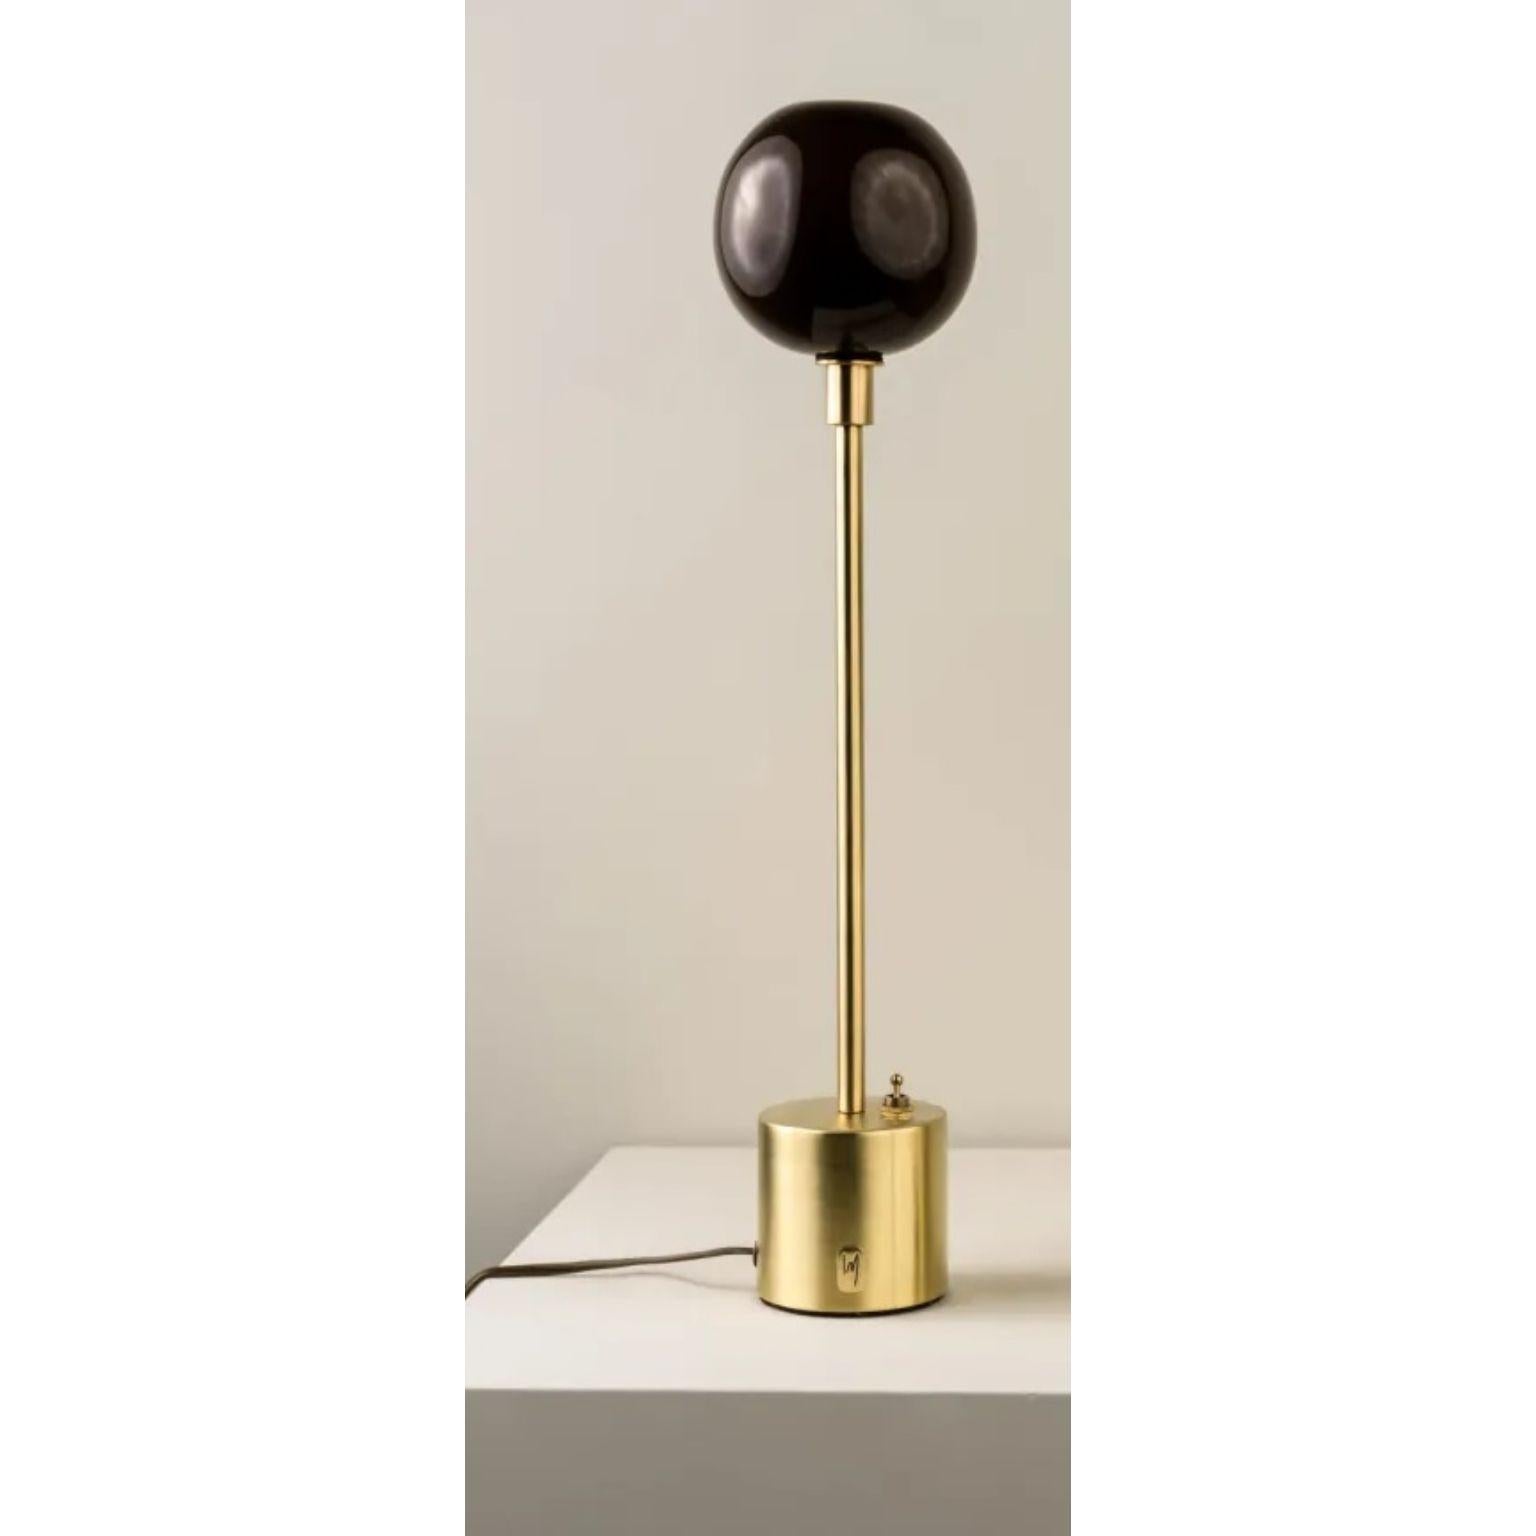 Átomo Coffee Blown Glass and Brass Table Lamp by Isabel Moncada
Dimensions: Ø 13 x H 33 cm.
Materials: Brass, steel and blown glass.

Átomo is perfect to give a touch of silent light, almost like a sparkle. The simplicity of its globe is enough, a